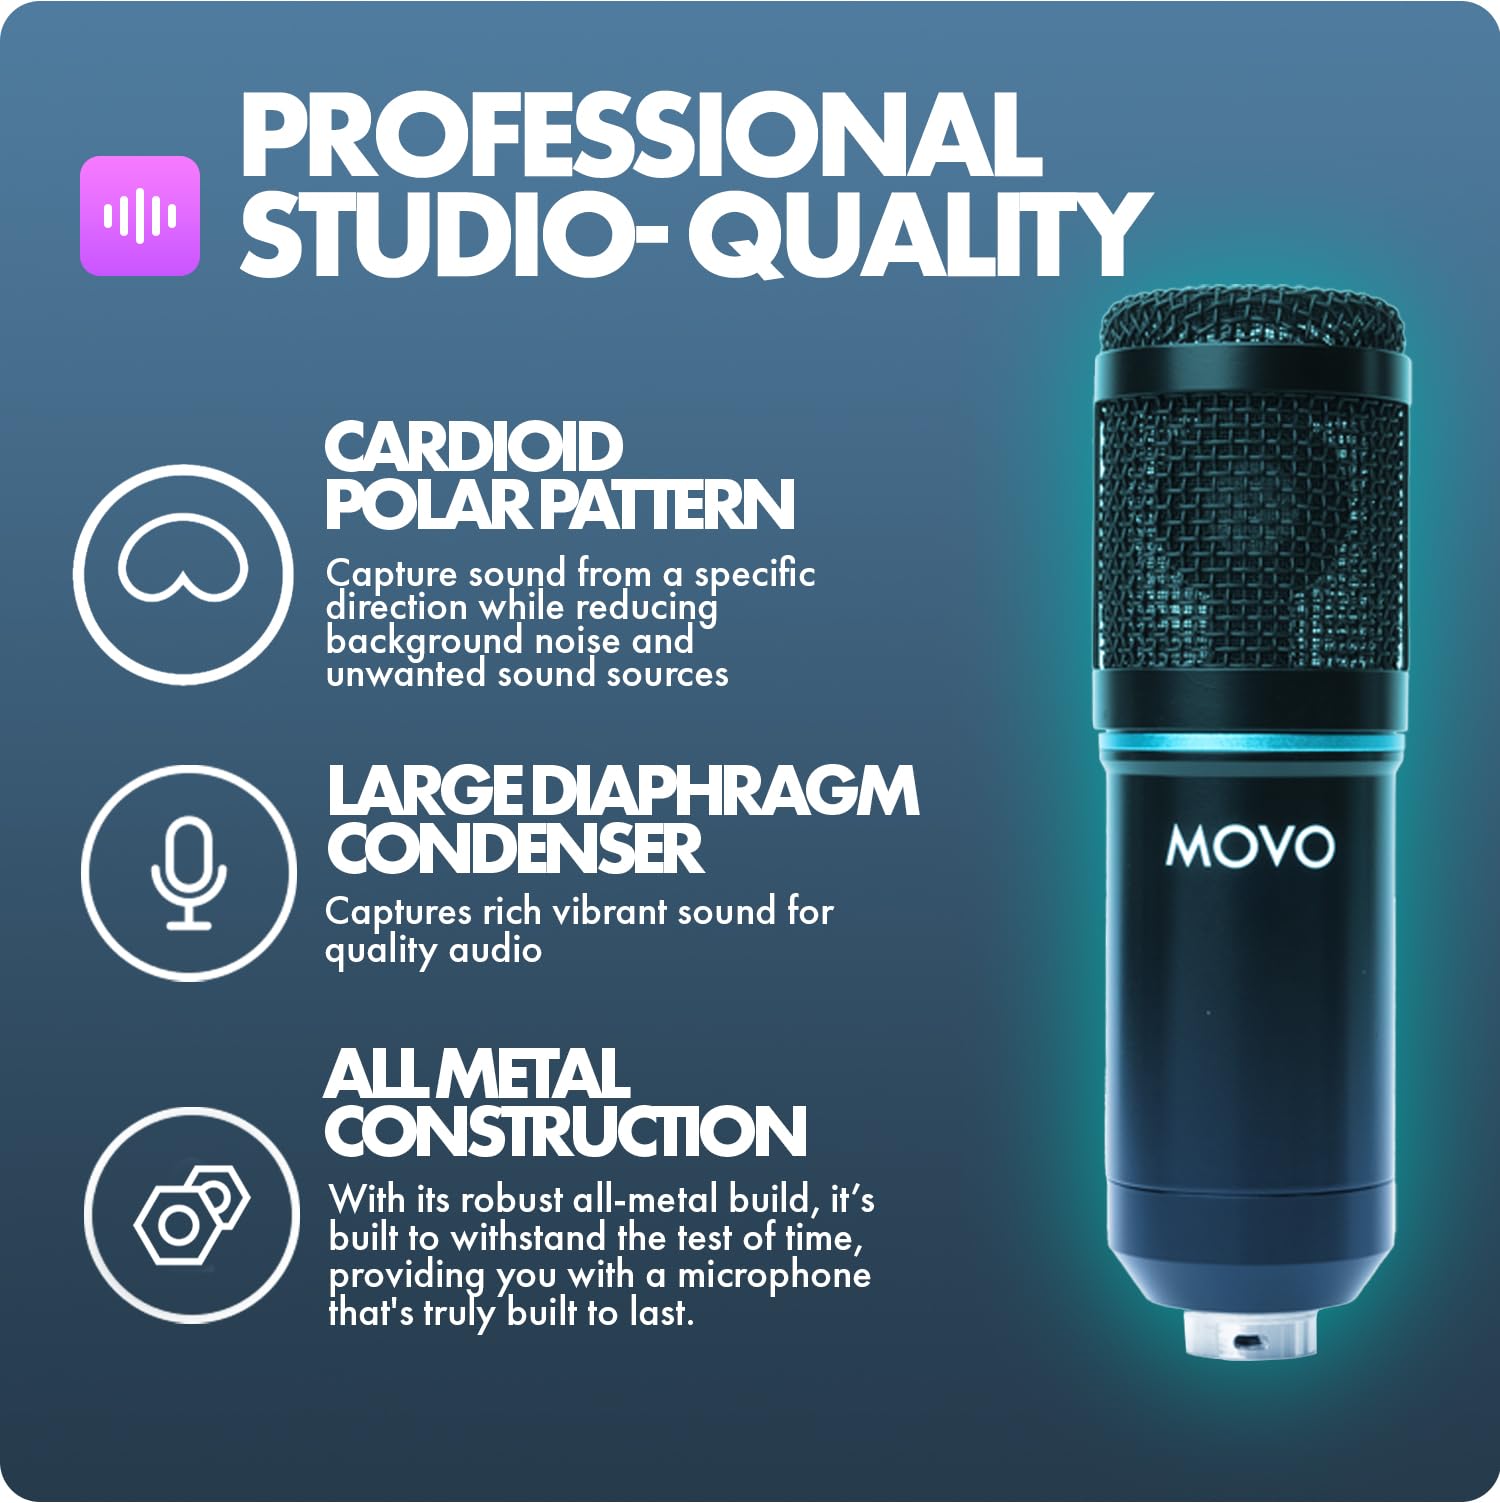 Movo PodPak2T 2-Pack Universal XLR Condenser Microphone Podcasting Equipment Bundle for 2 - Includes 2 Cardioid Mics, Desktop Stands, Shock Mounts, Pop Filters and Cables - Podcast and YouTube Kit  - Acceptable